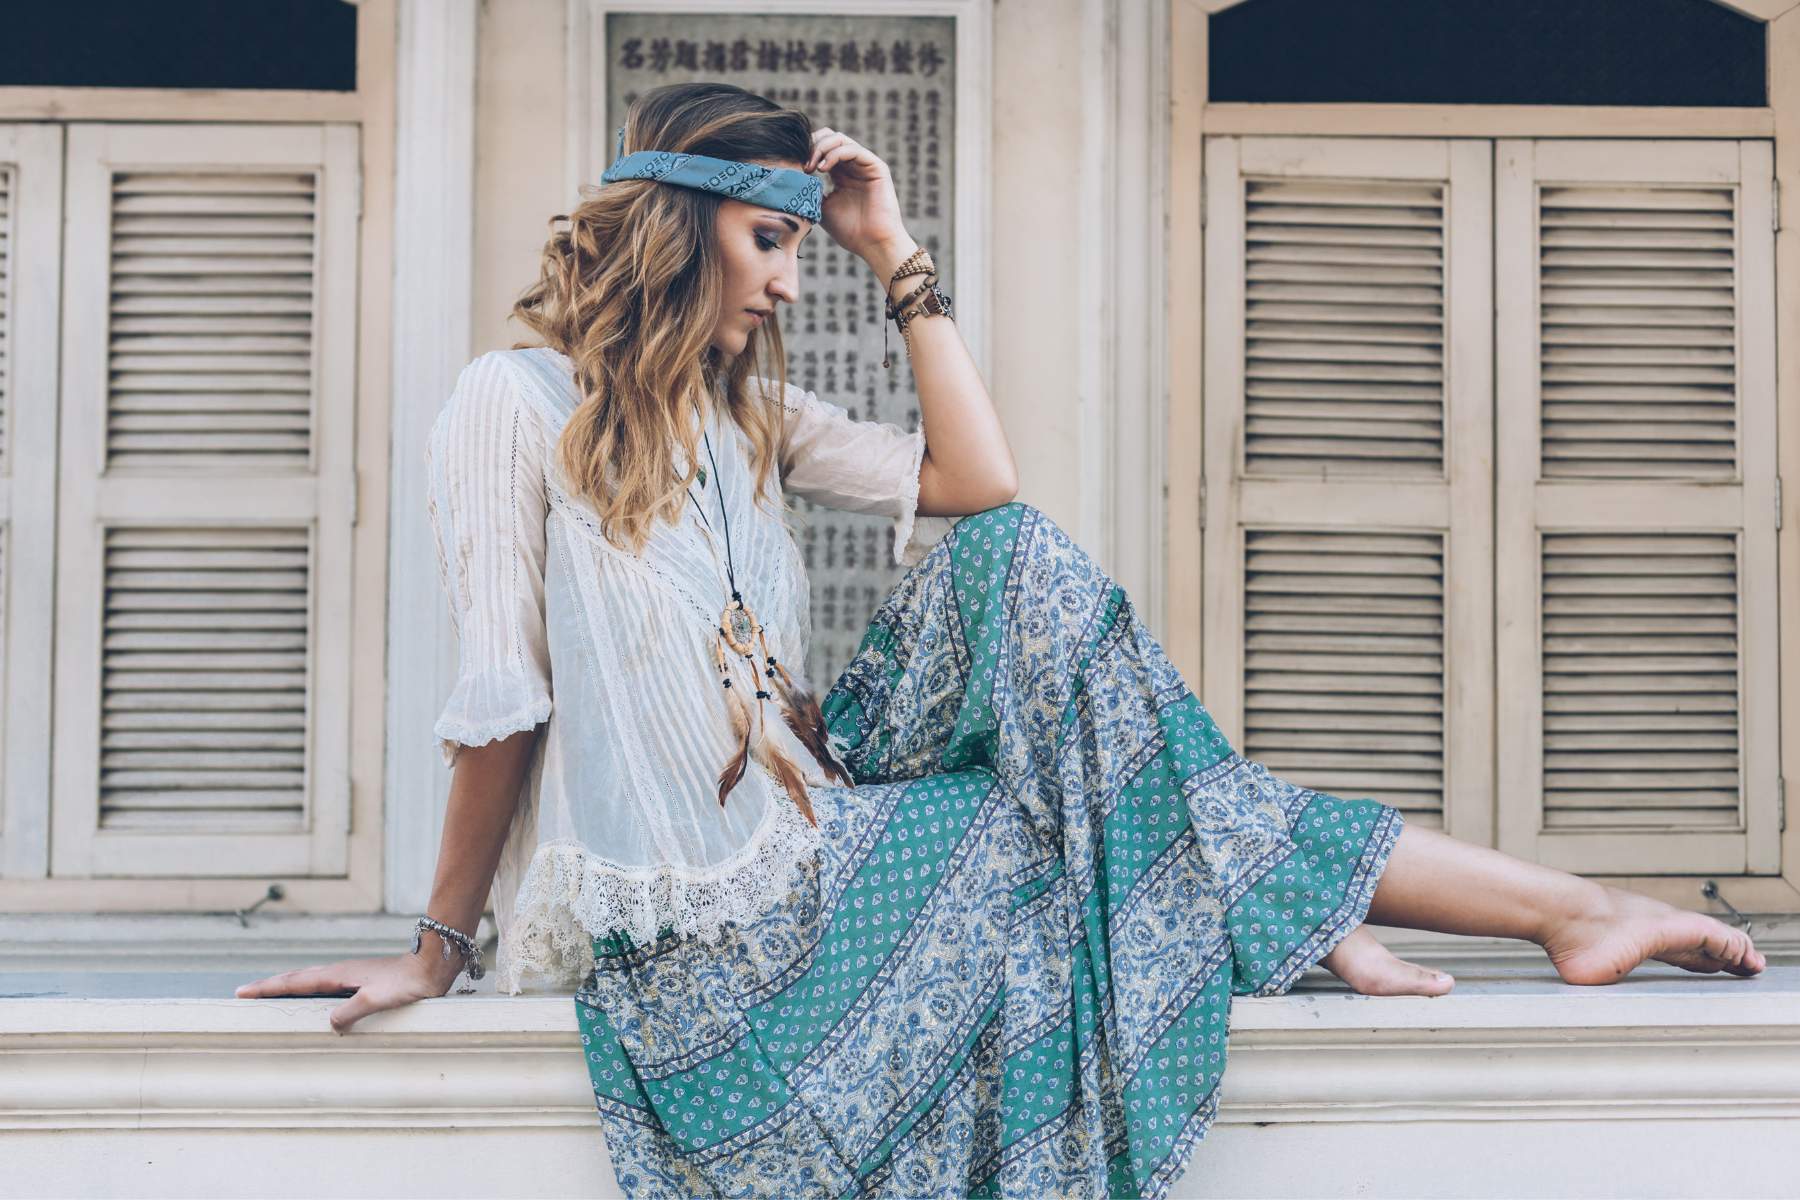 Reasons To Wear Boho-Chic Maxi Dresses For Summer 